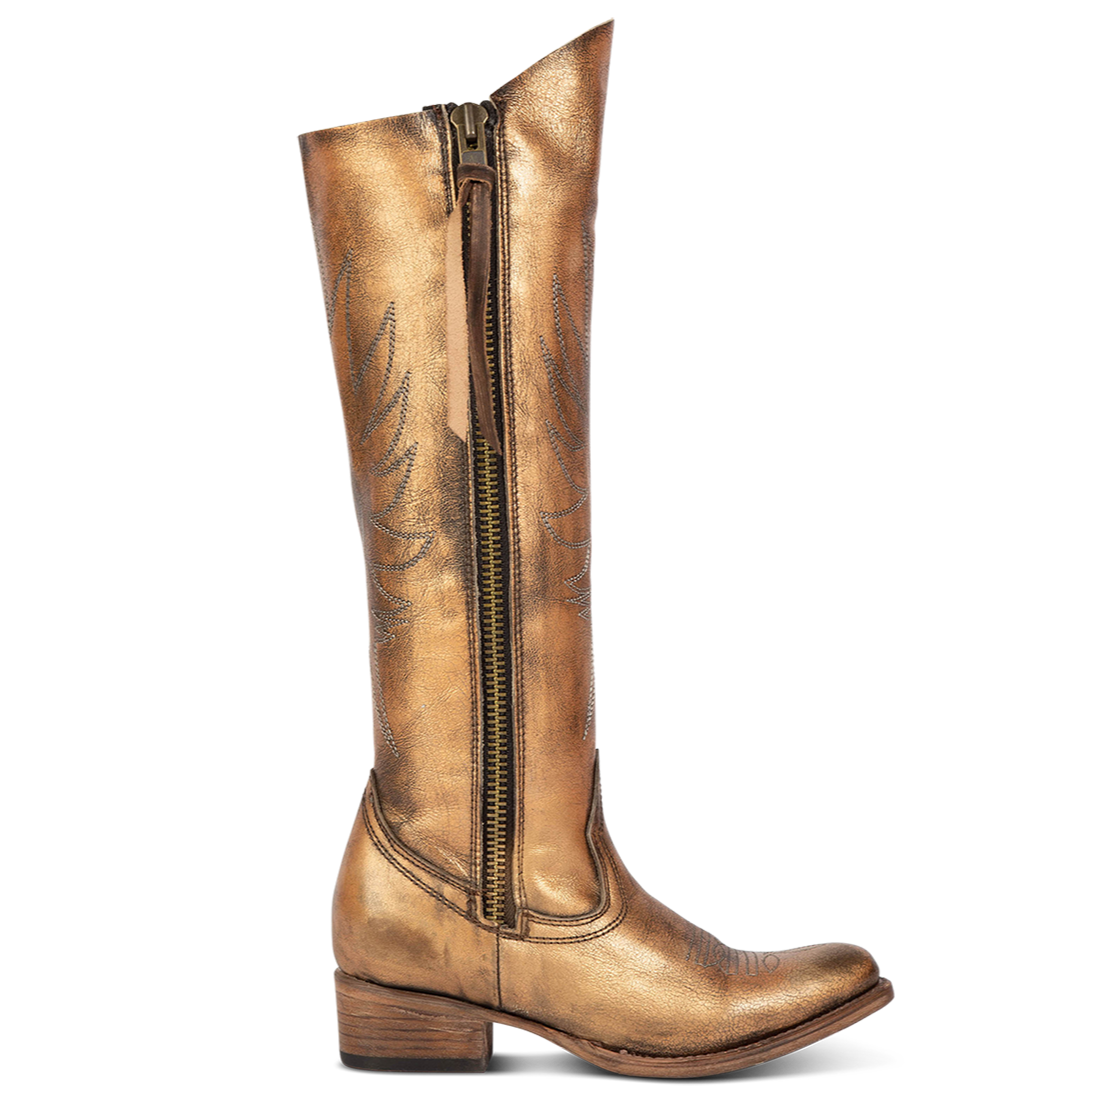 FREEBIRD women's Whisper bronze distressed boot with western shaft stitching and outer zip closure accent